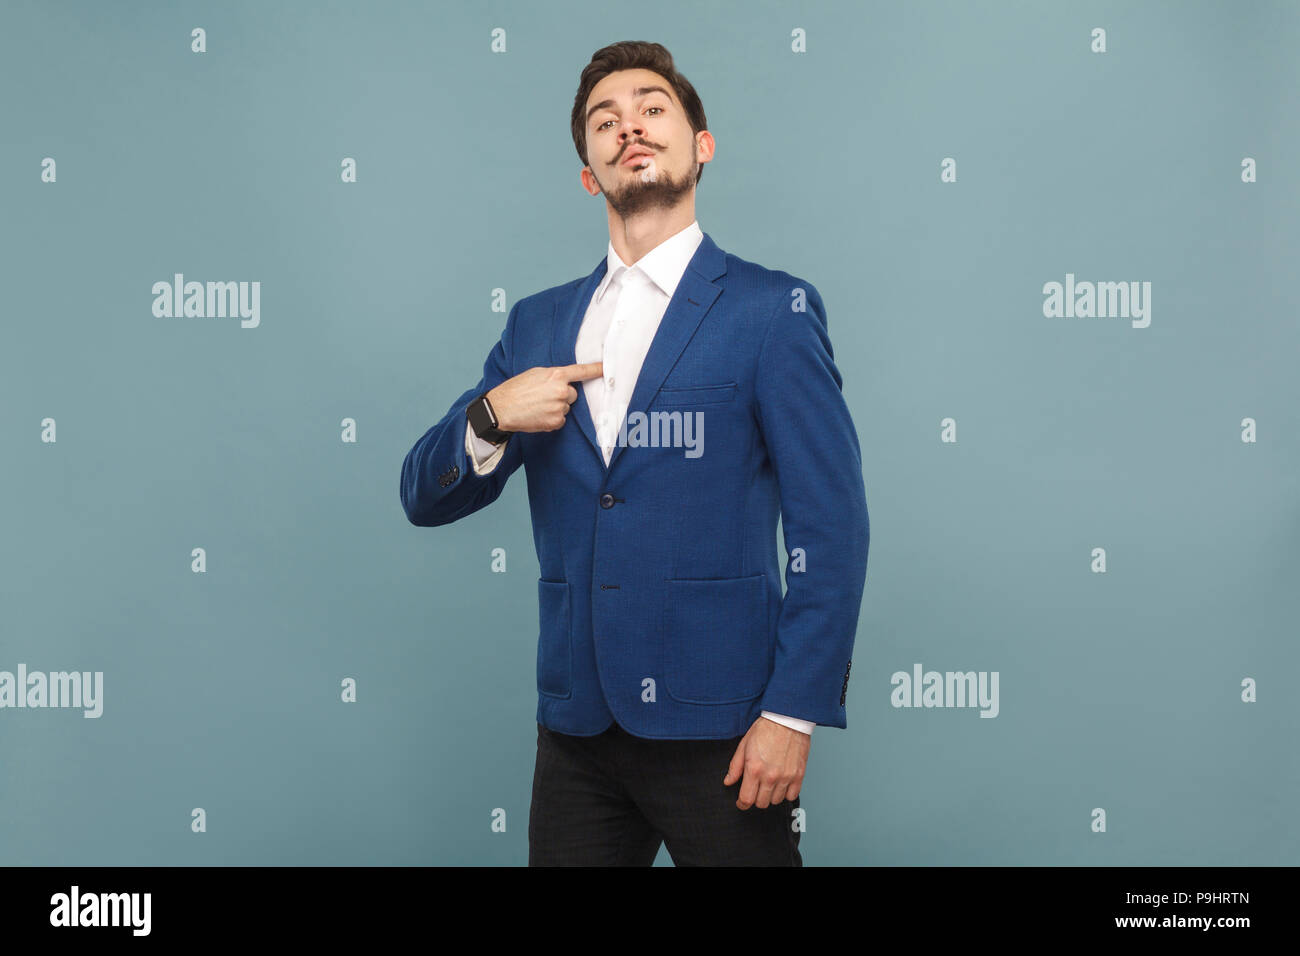 Proud man in military suit Stock Photo - Alamy